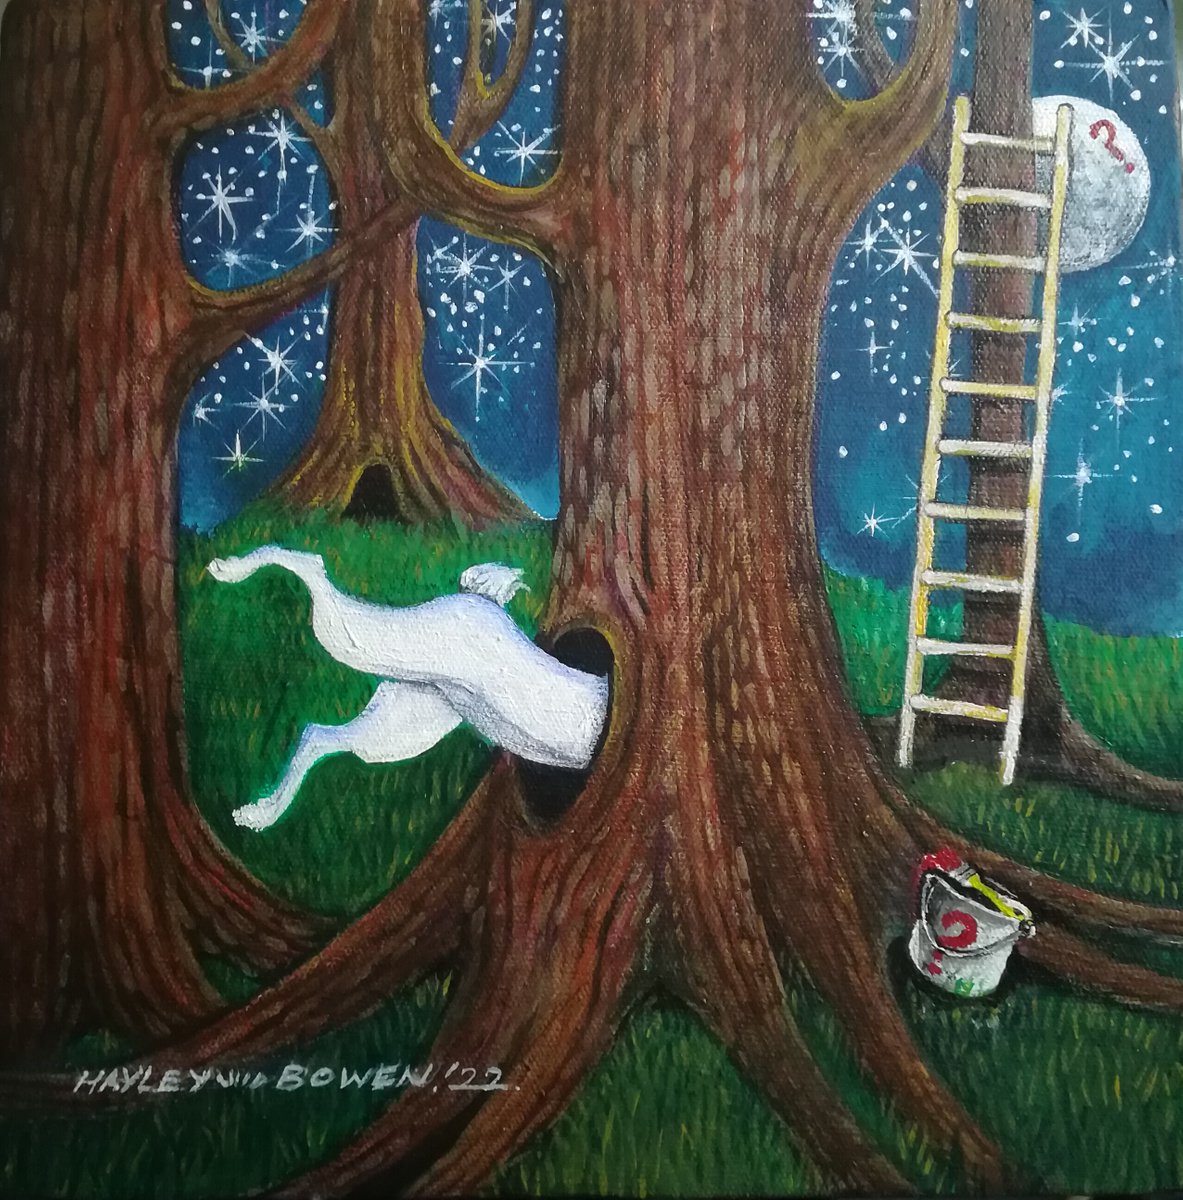 Ladder To The Moon by Hayley Bowen